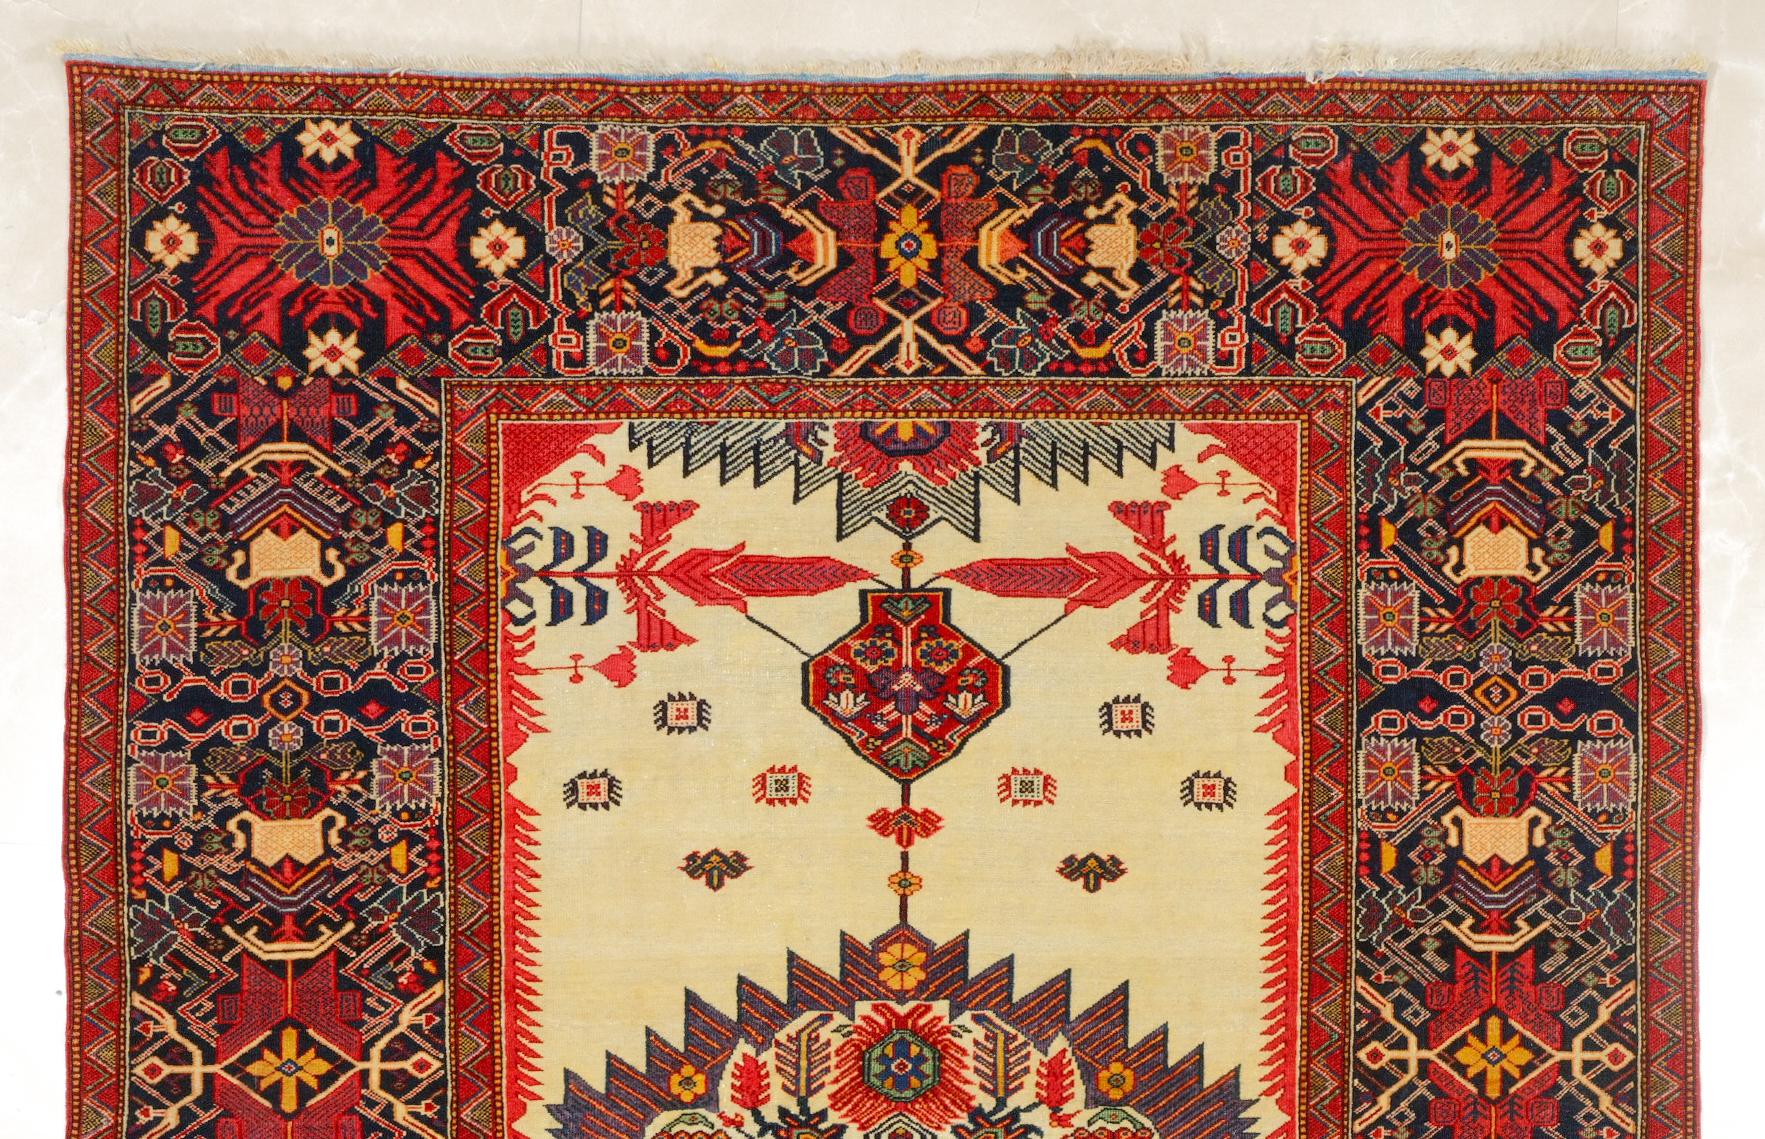 Antique Farahan Sarouk Carpet - Late of 19th Century Sarouk Rug
Size : 127 x 190 cm (50x74,8 In)

A Timeless Beauty: Antique Ferahan Carpet from the Late 19th Century

If you want to add timeless beauty to your home or office, this Antique Ferahan